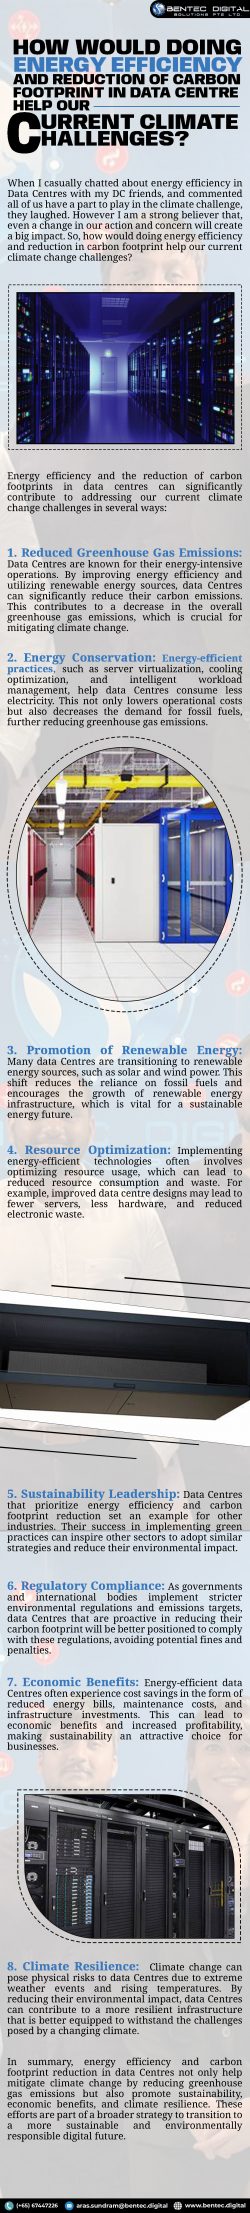 HOW WOULD DOING ENERGY EFFICIENCY AND REDUCTION OF CARBON FOOTPRINT IN DATA CENTRE HELP OUR CURR ...